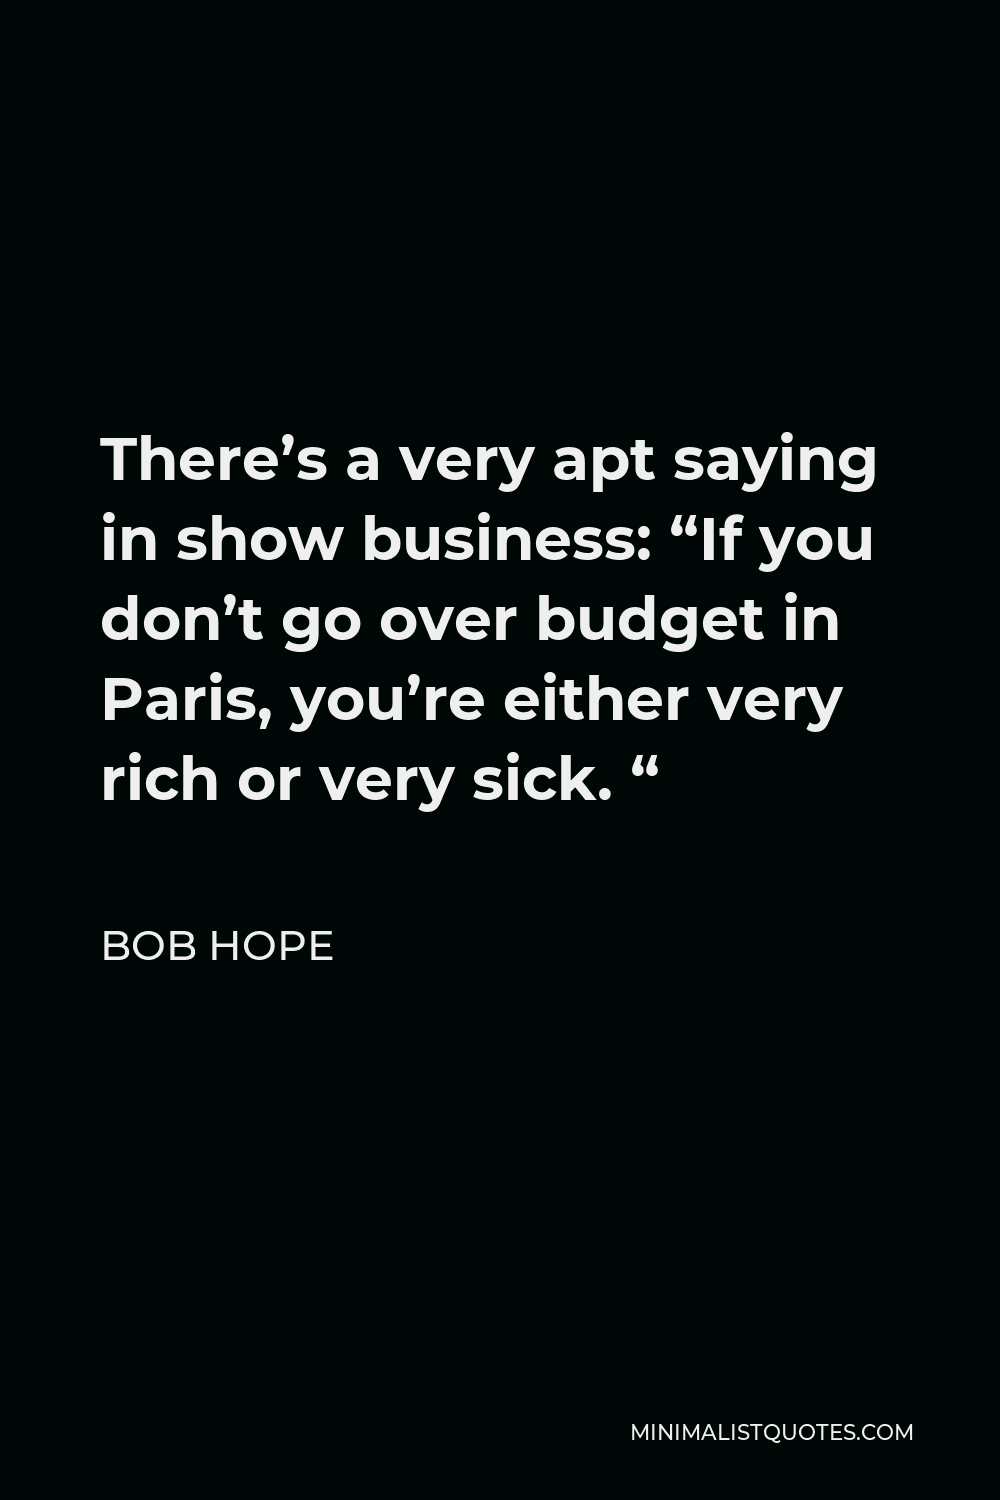 Bob Hope Quote - There’s a very apt saying in show business: “If you don’t go over budget in Paris, you’re either very rich or very sick. “